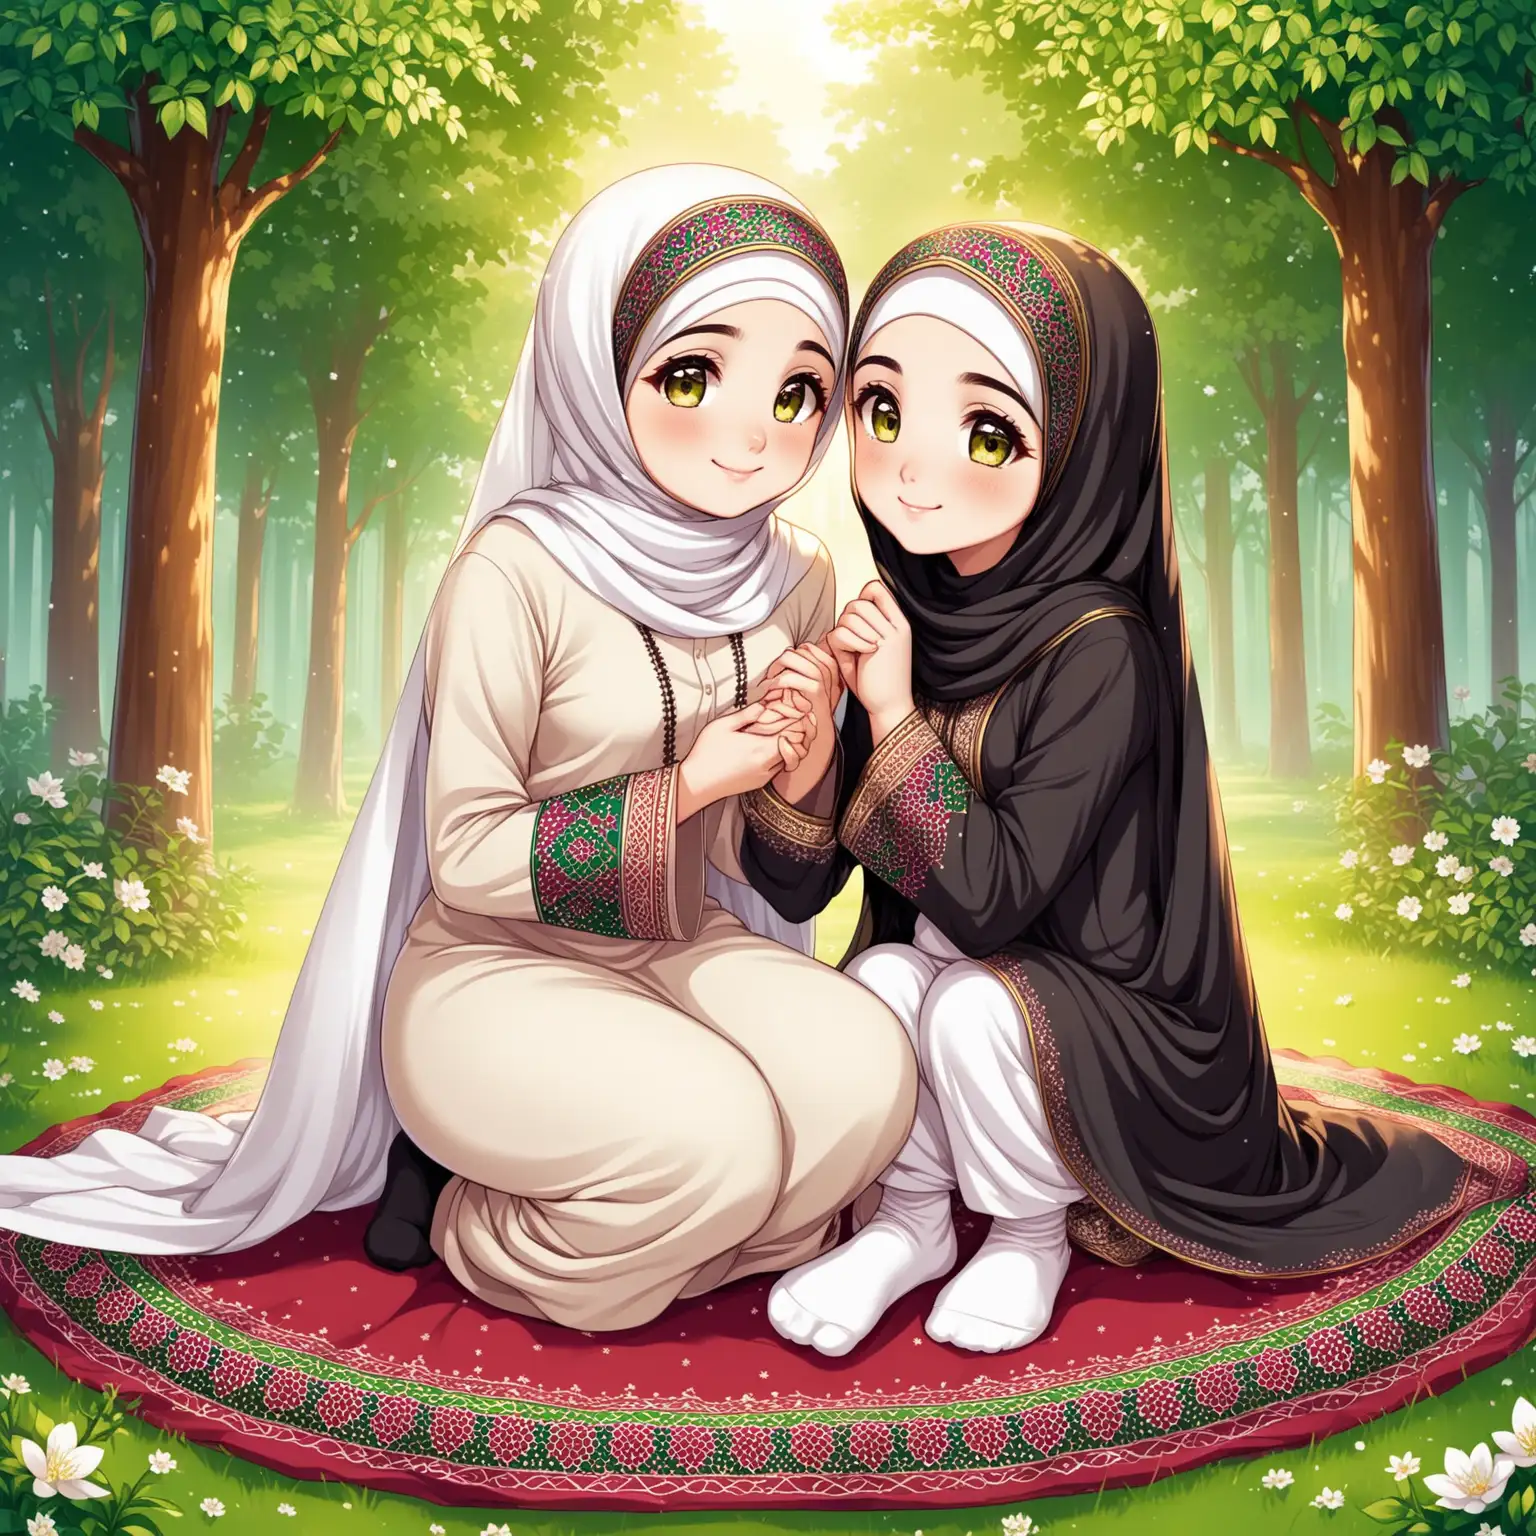 Persian Girl Fatemeh Kissing Mother Roqayehs Hand in Forest Setting